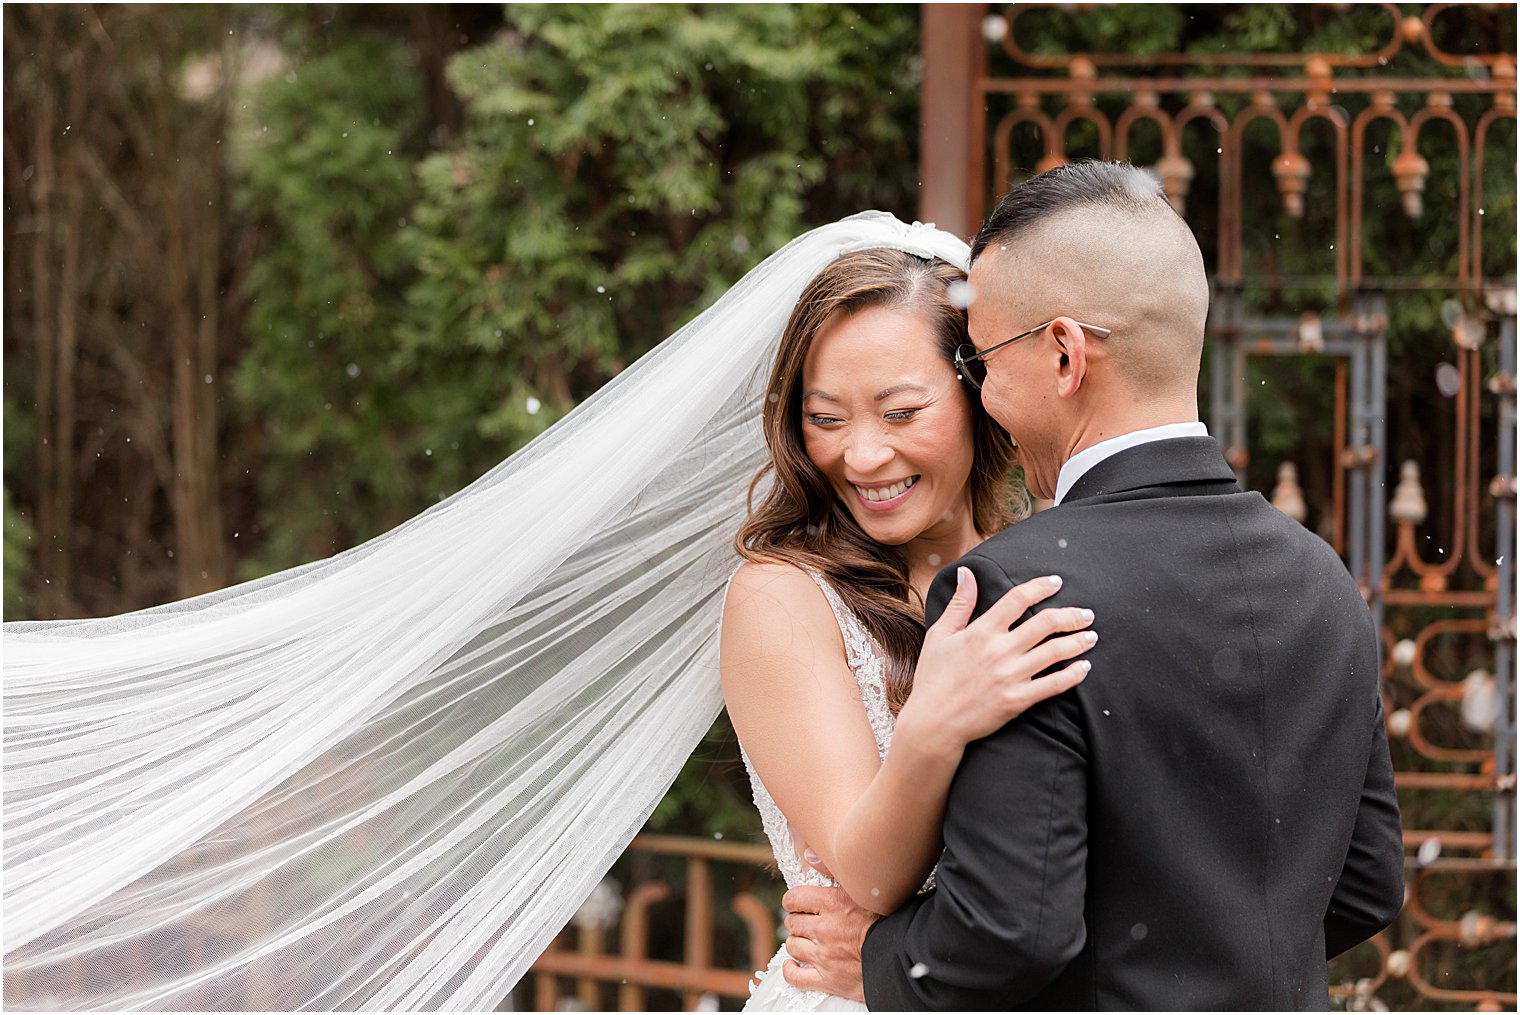 groom nuzzles bride's cheek during portraits on patio